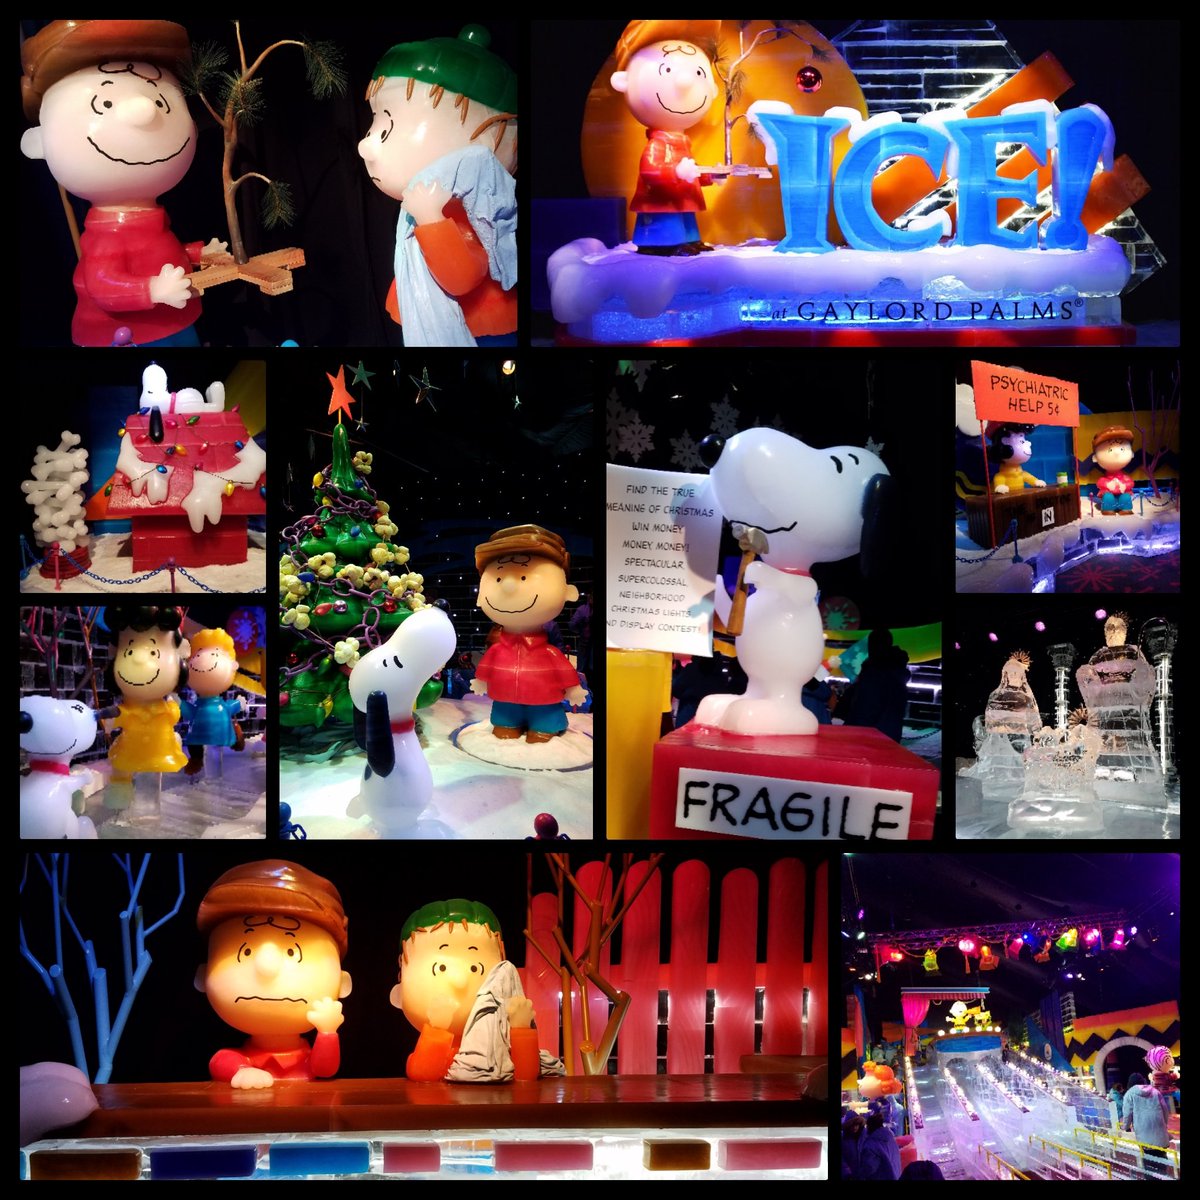 The 'Ice! featuring A Charlie Brown Christmas' Exhibit at @GaylordNational is amazing. Incredible artistry carved out of ice. Check it out! #BlueParka @Snoopy